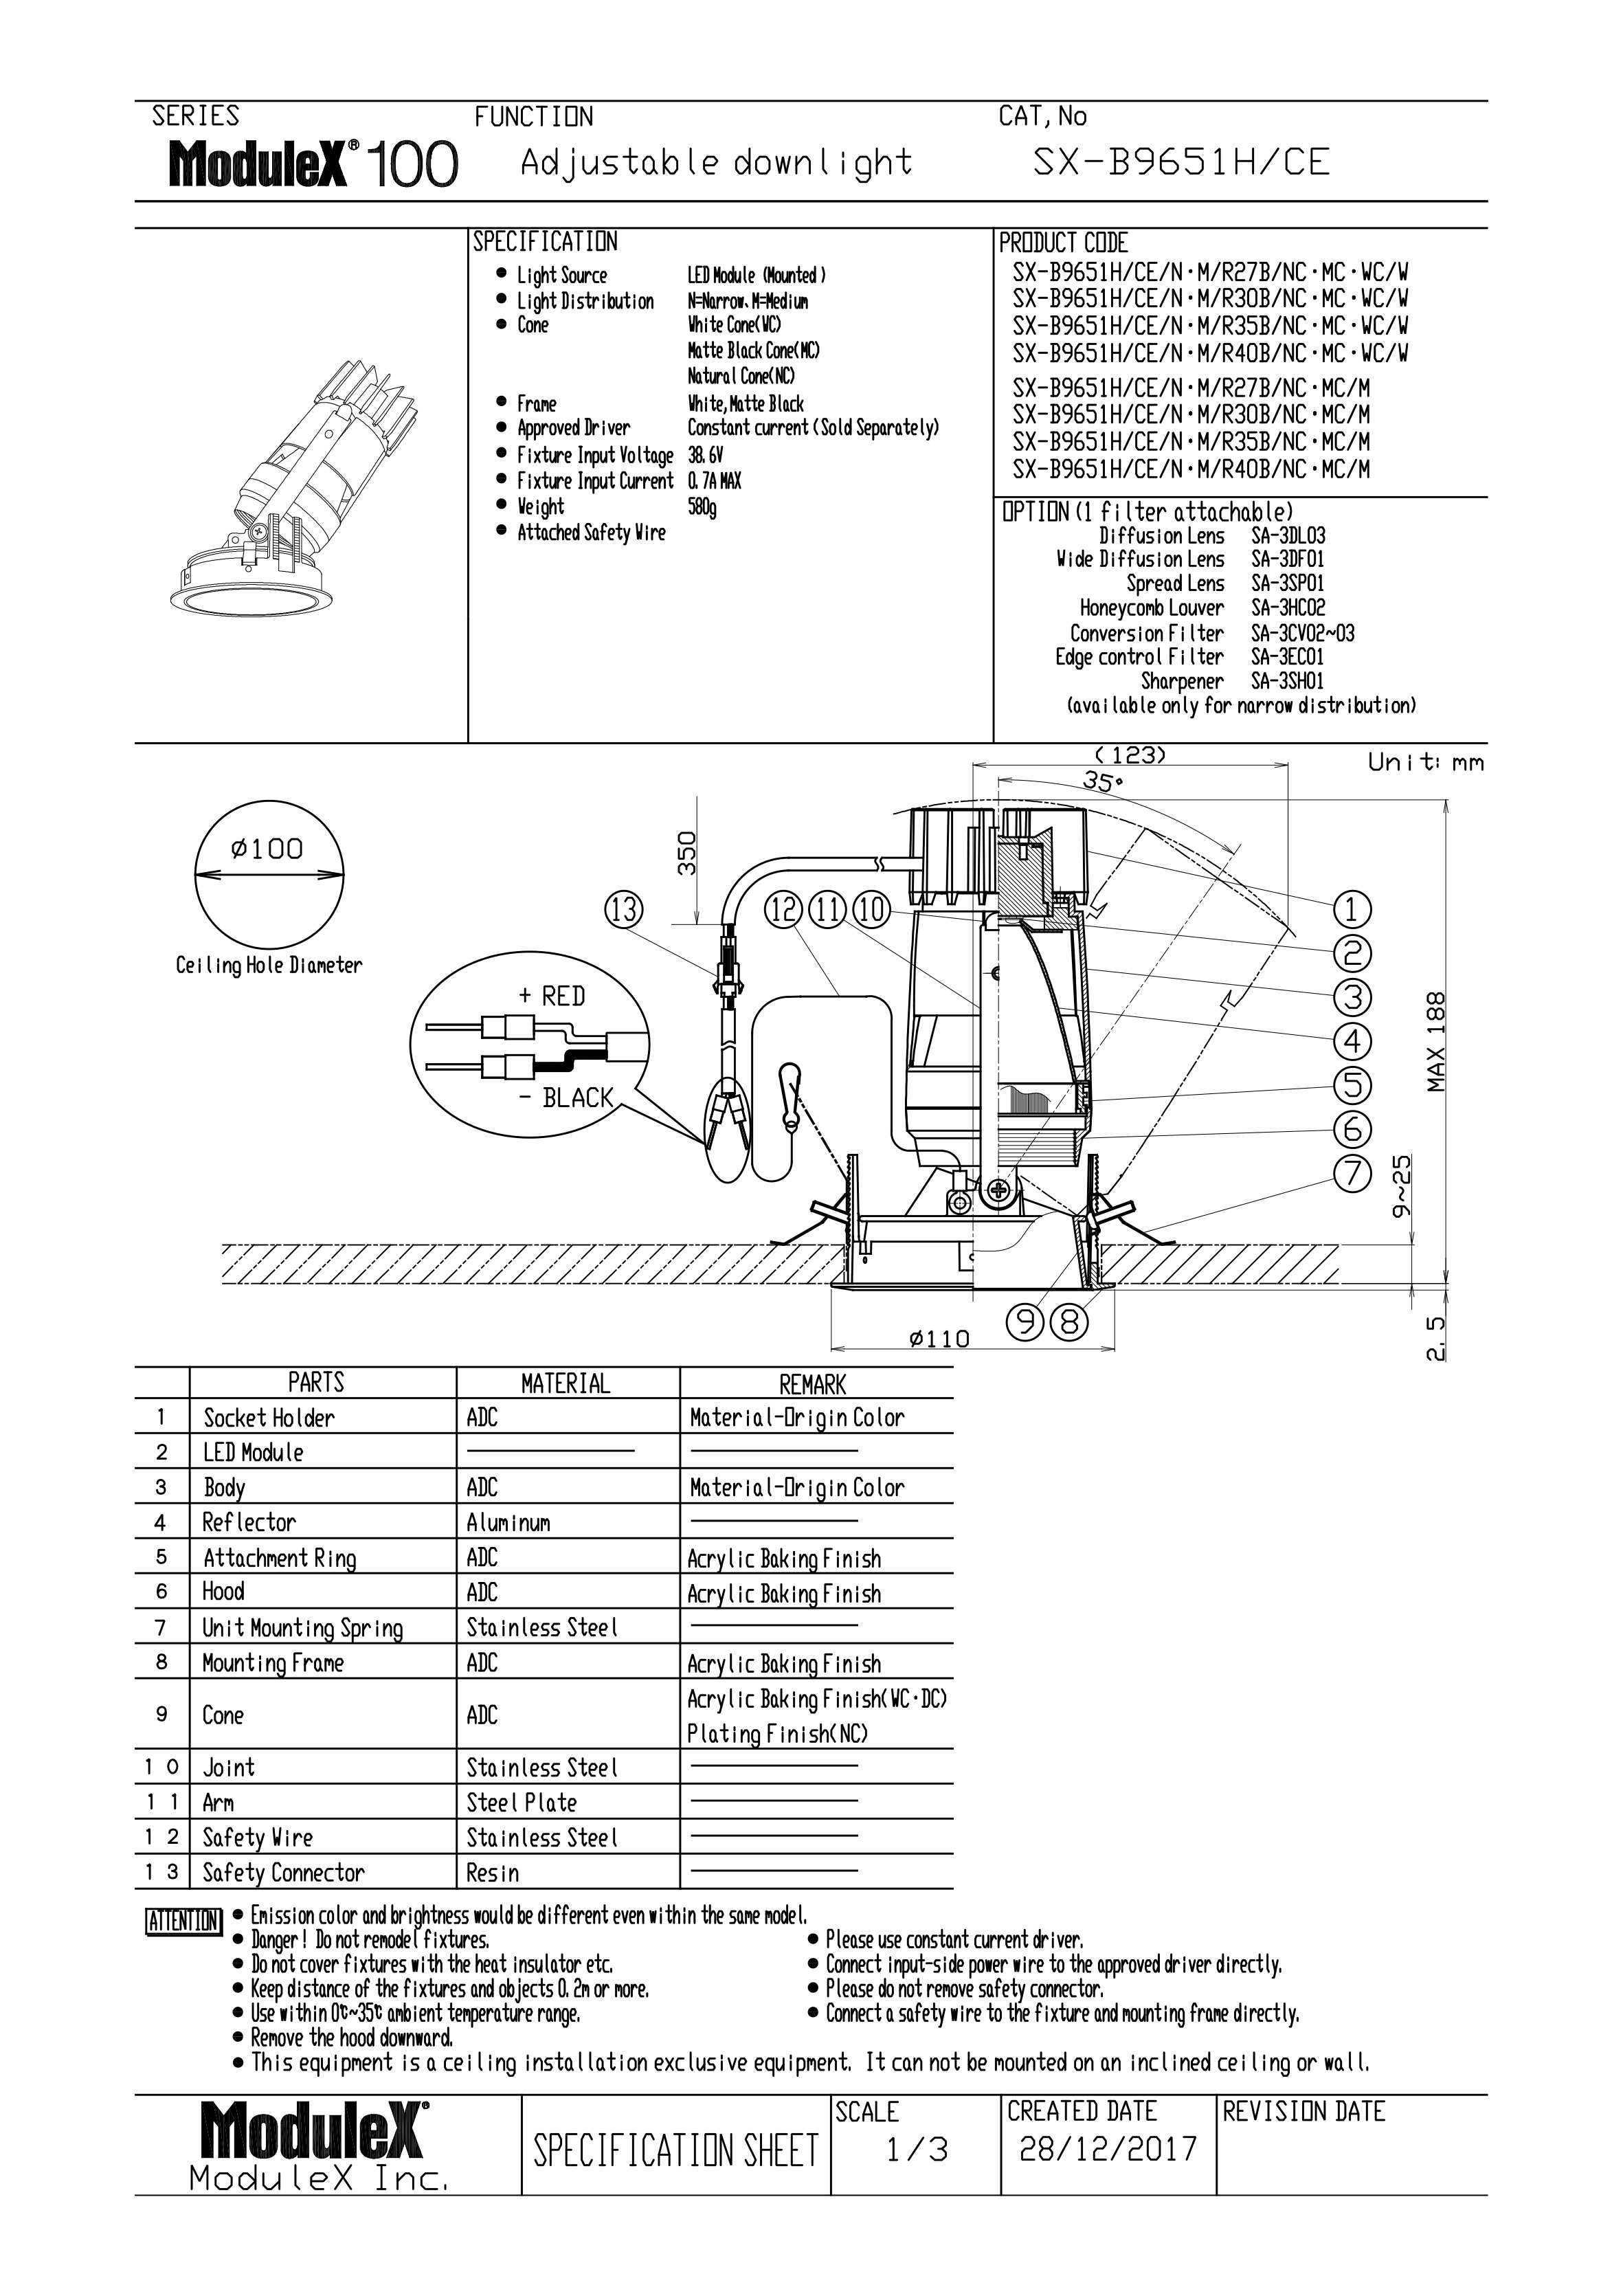 SX-B9651H Specification Sheet